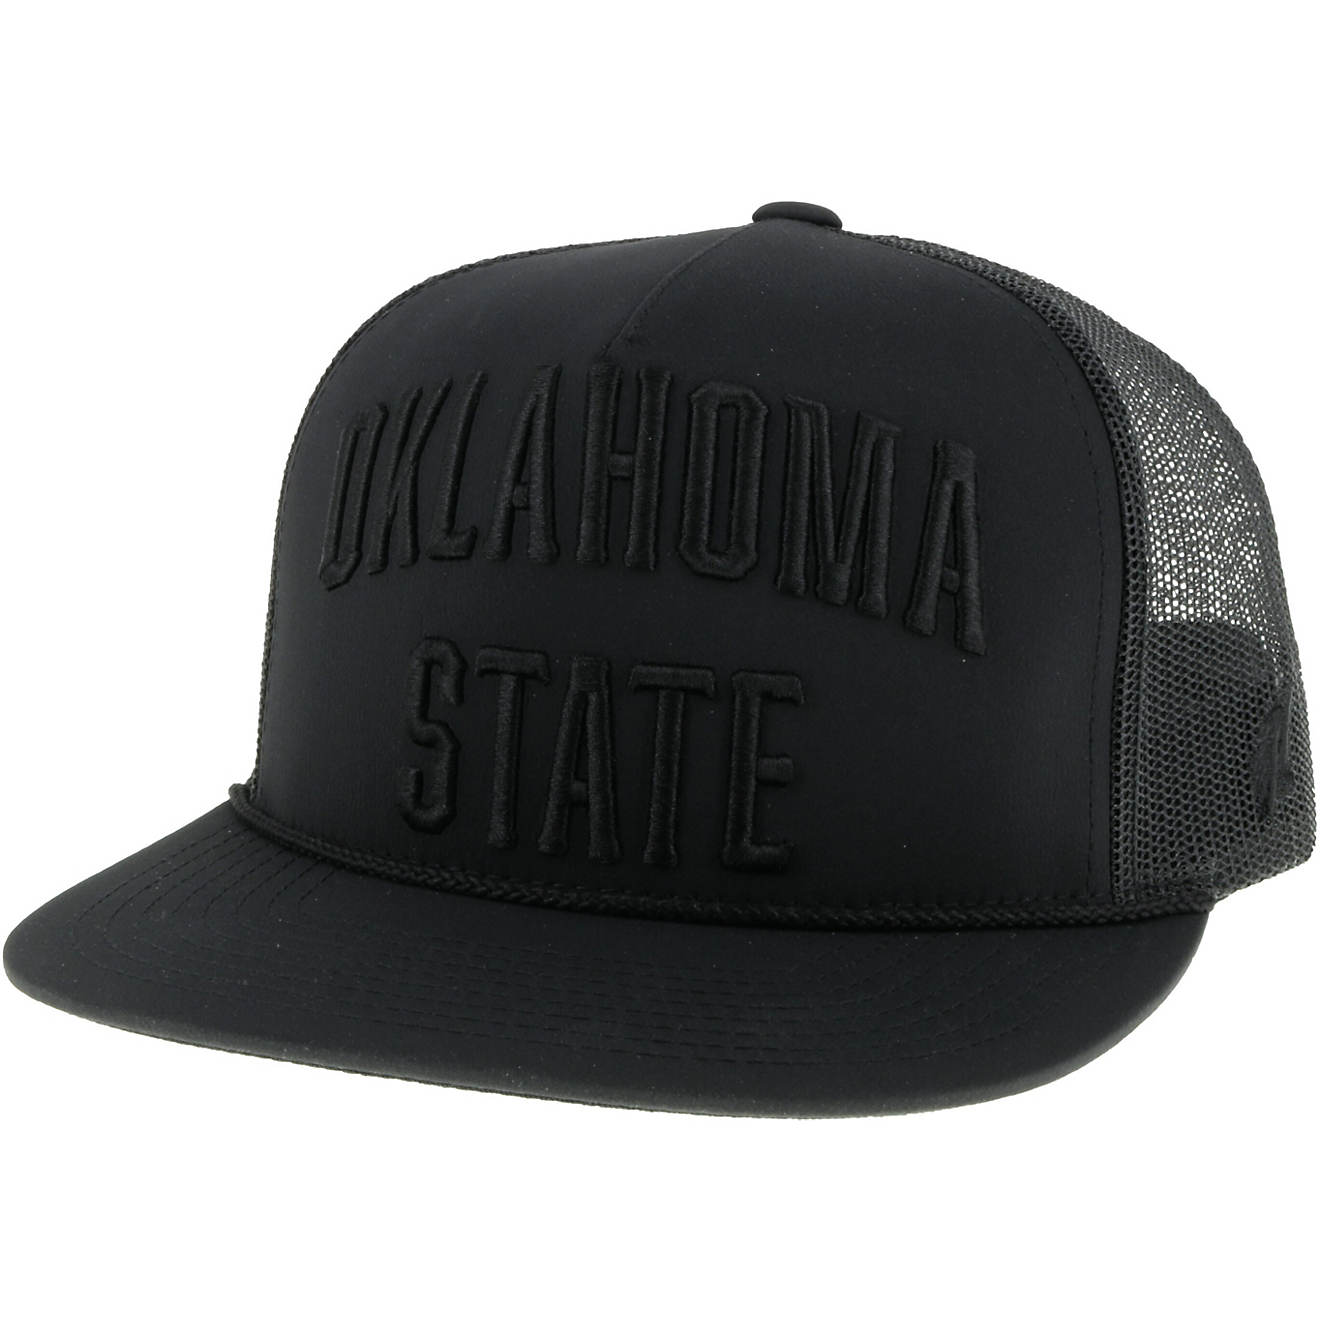 Hooey Oklahoma State University Blackout Trucker Hat                                                                             - view number 1